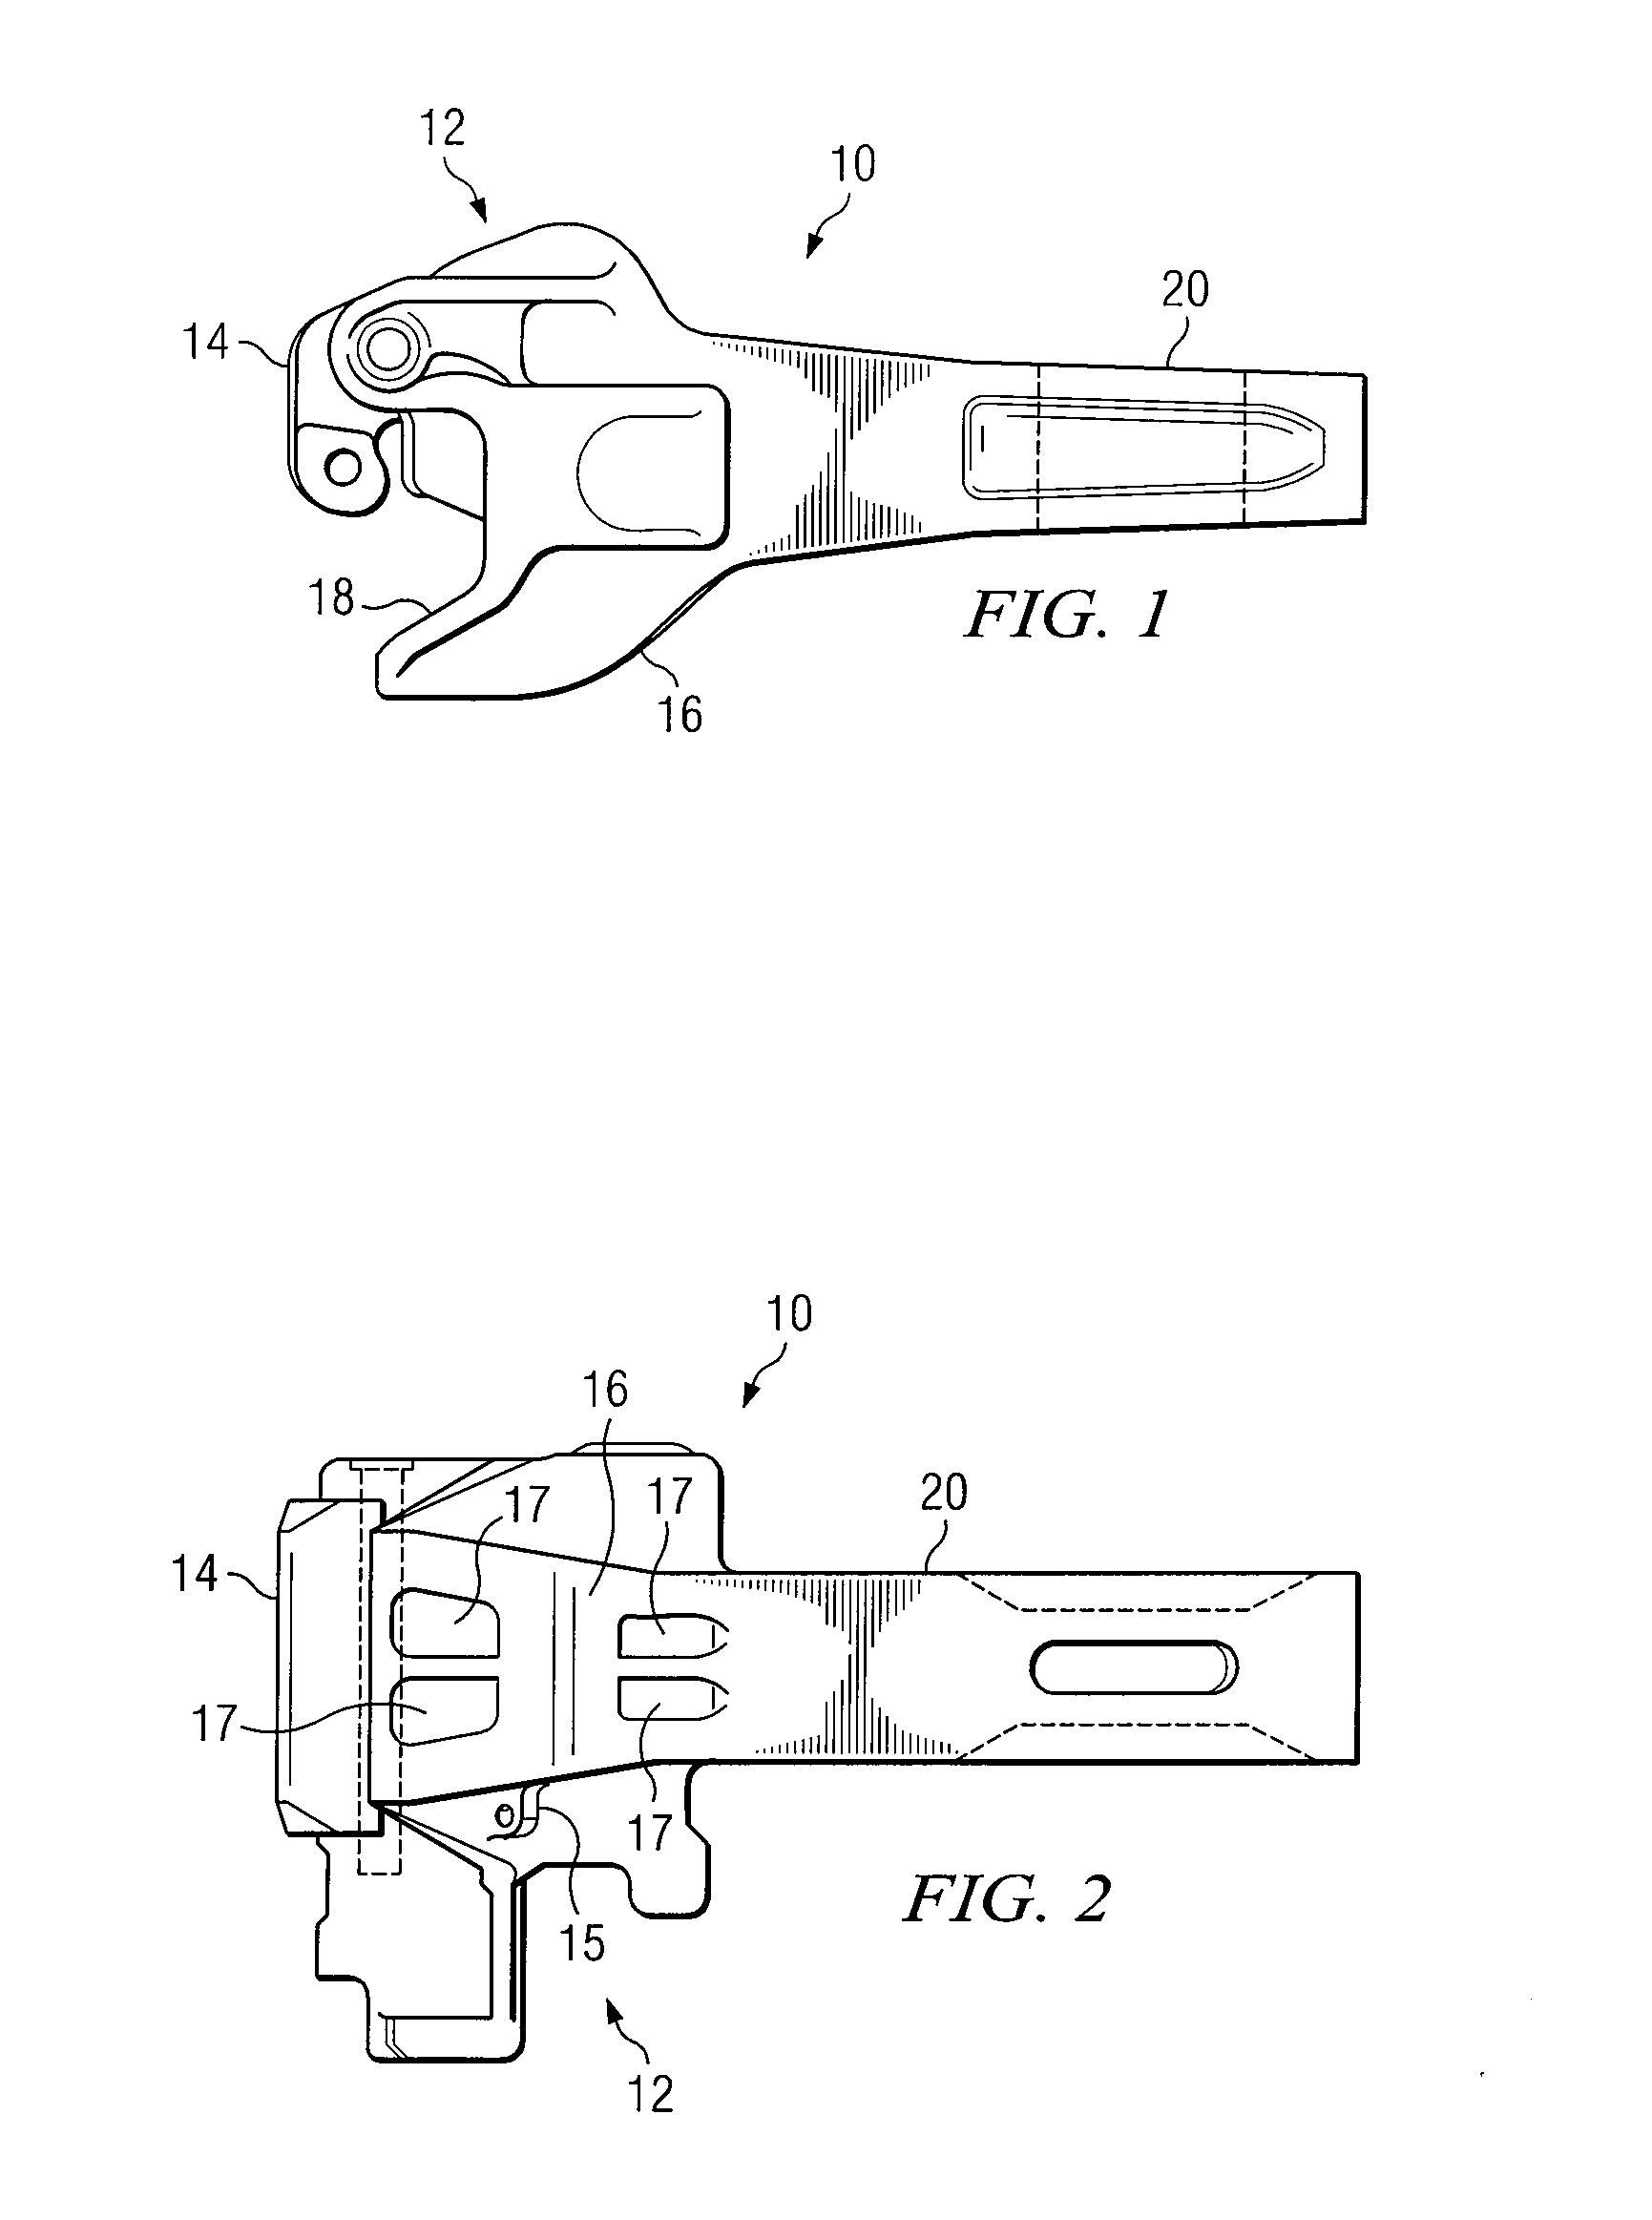 Railcar Coupler System and Method